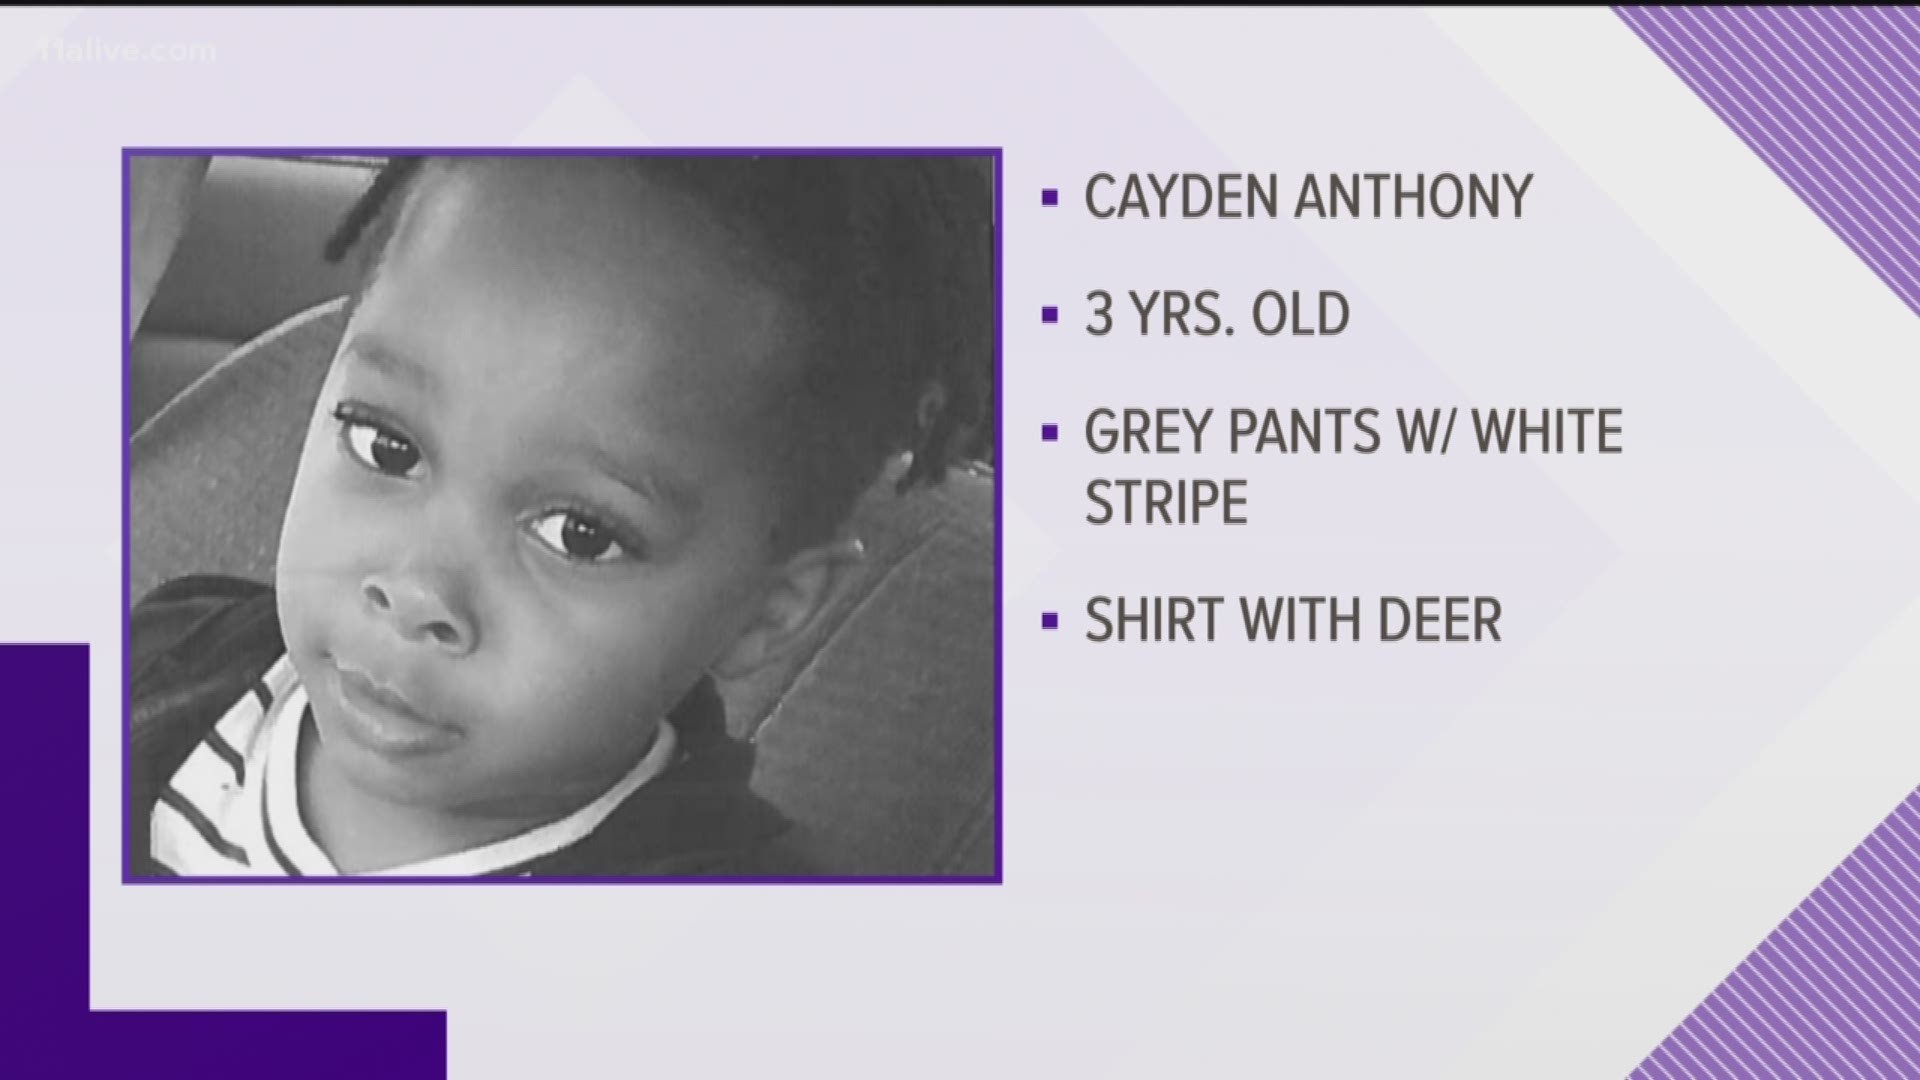 Authorities say Cayden Anthony was taken by Curtis Bernard Hall around 9:30 a.m. Tuesday.